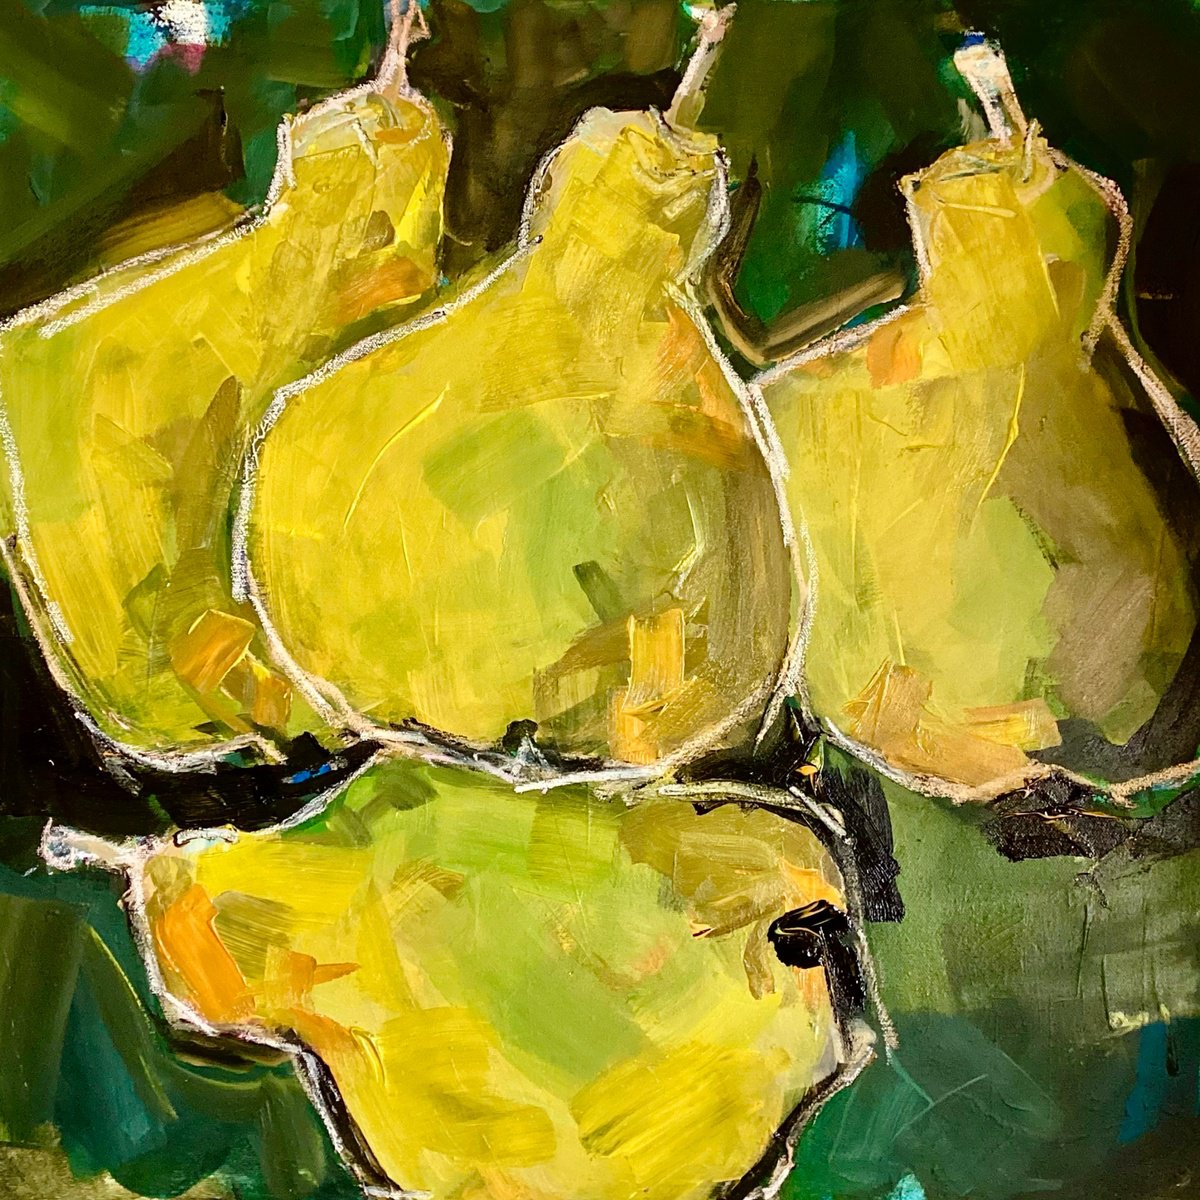 Midnight Pears by Irene Wilkes